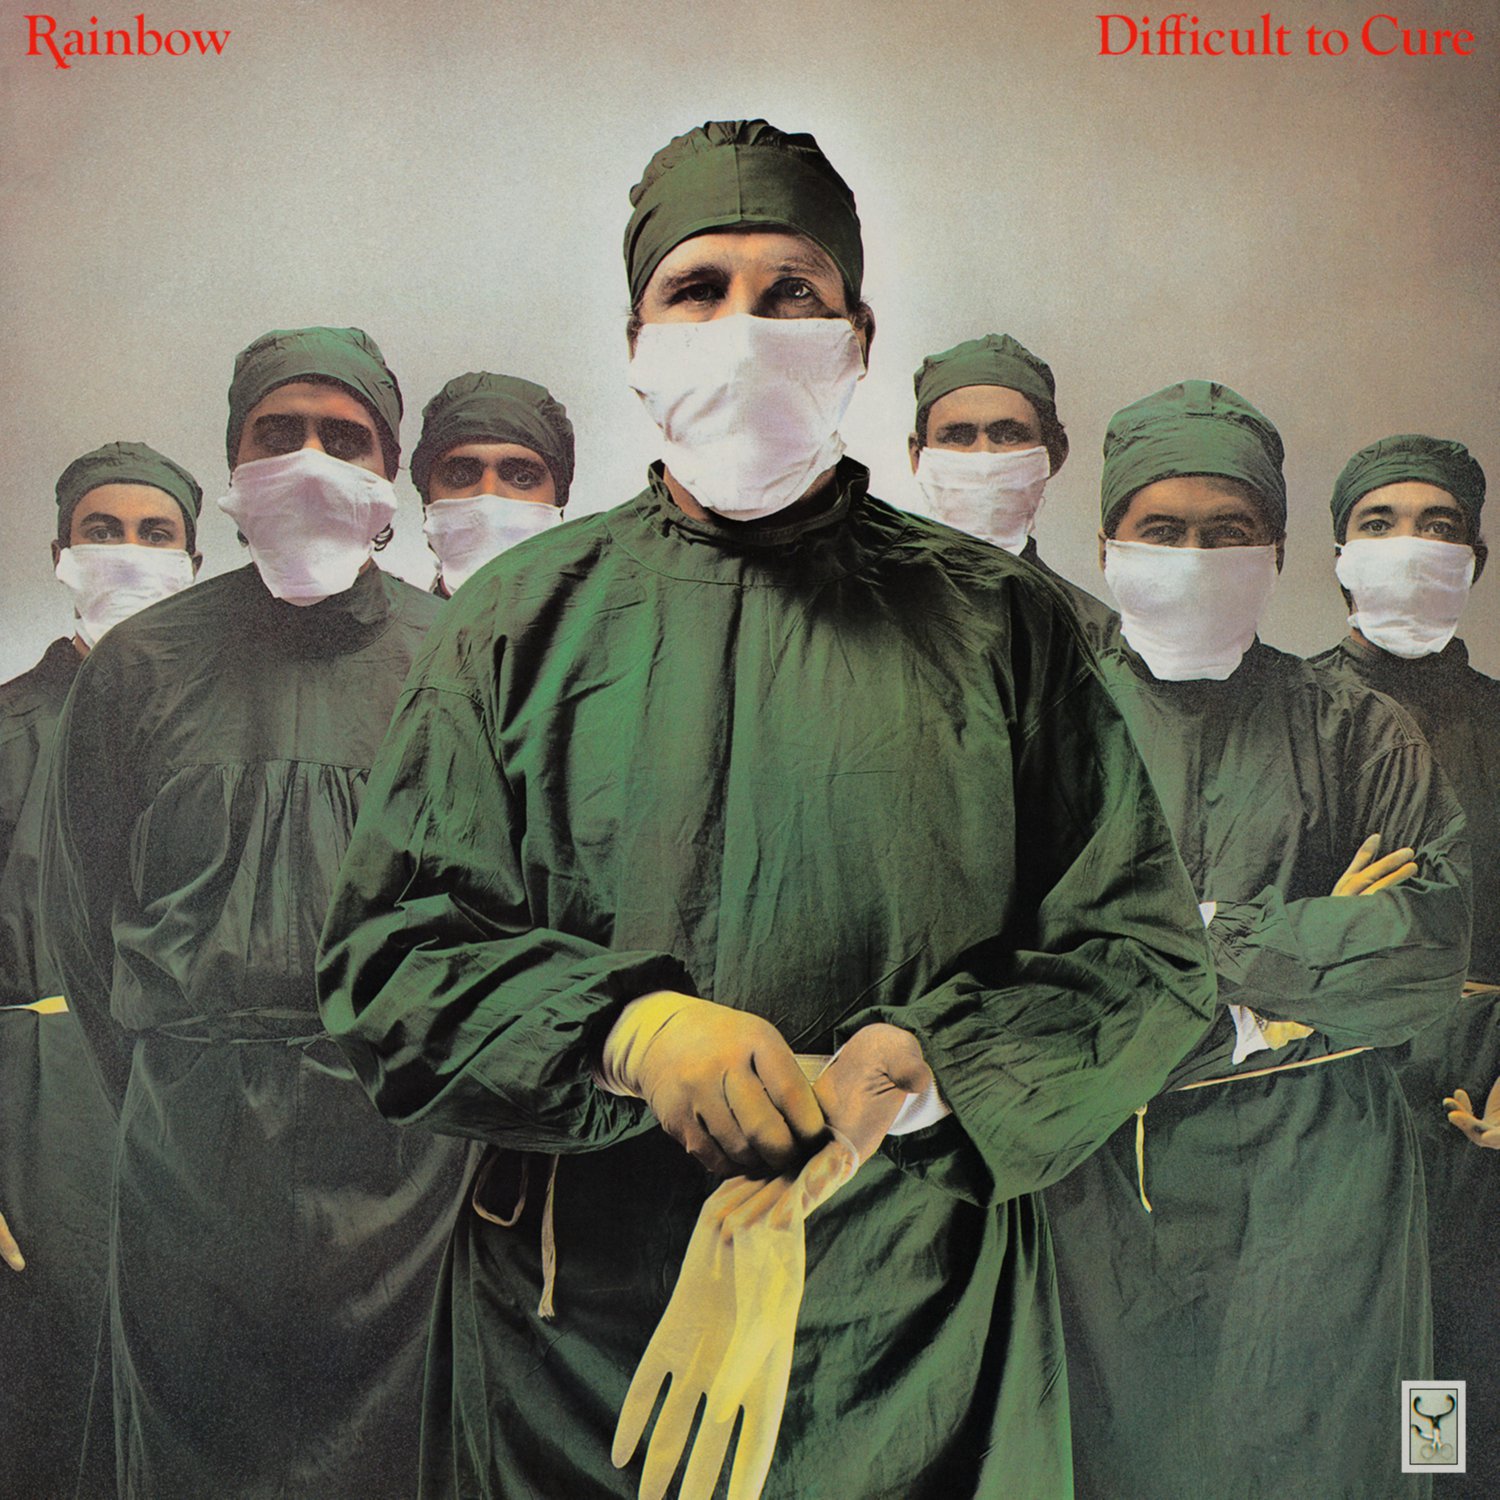 RAINBOW Difficult to Cure BANNER Huge 4X4 Ft Fabric Poster Tapestry Flag Print album cover art